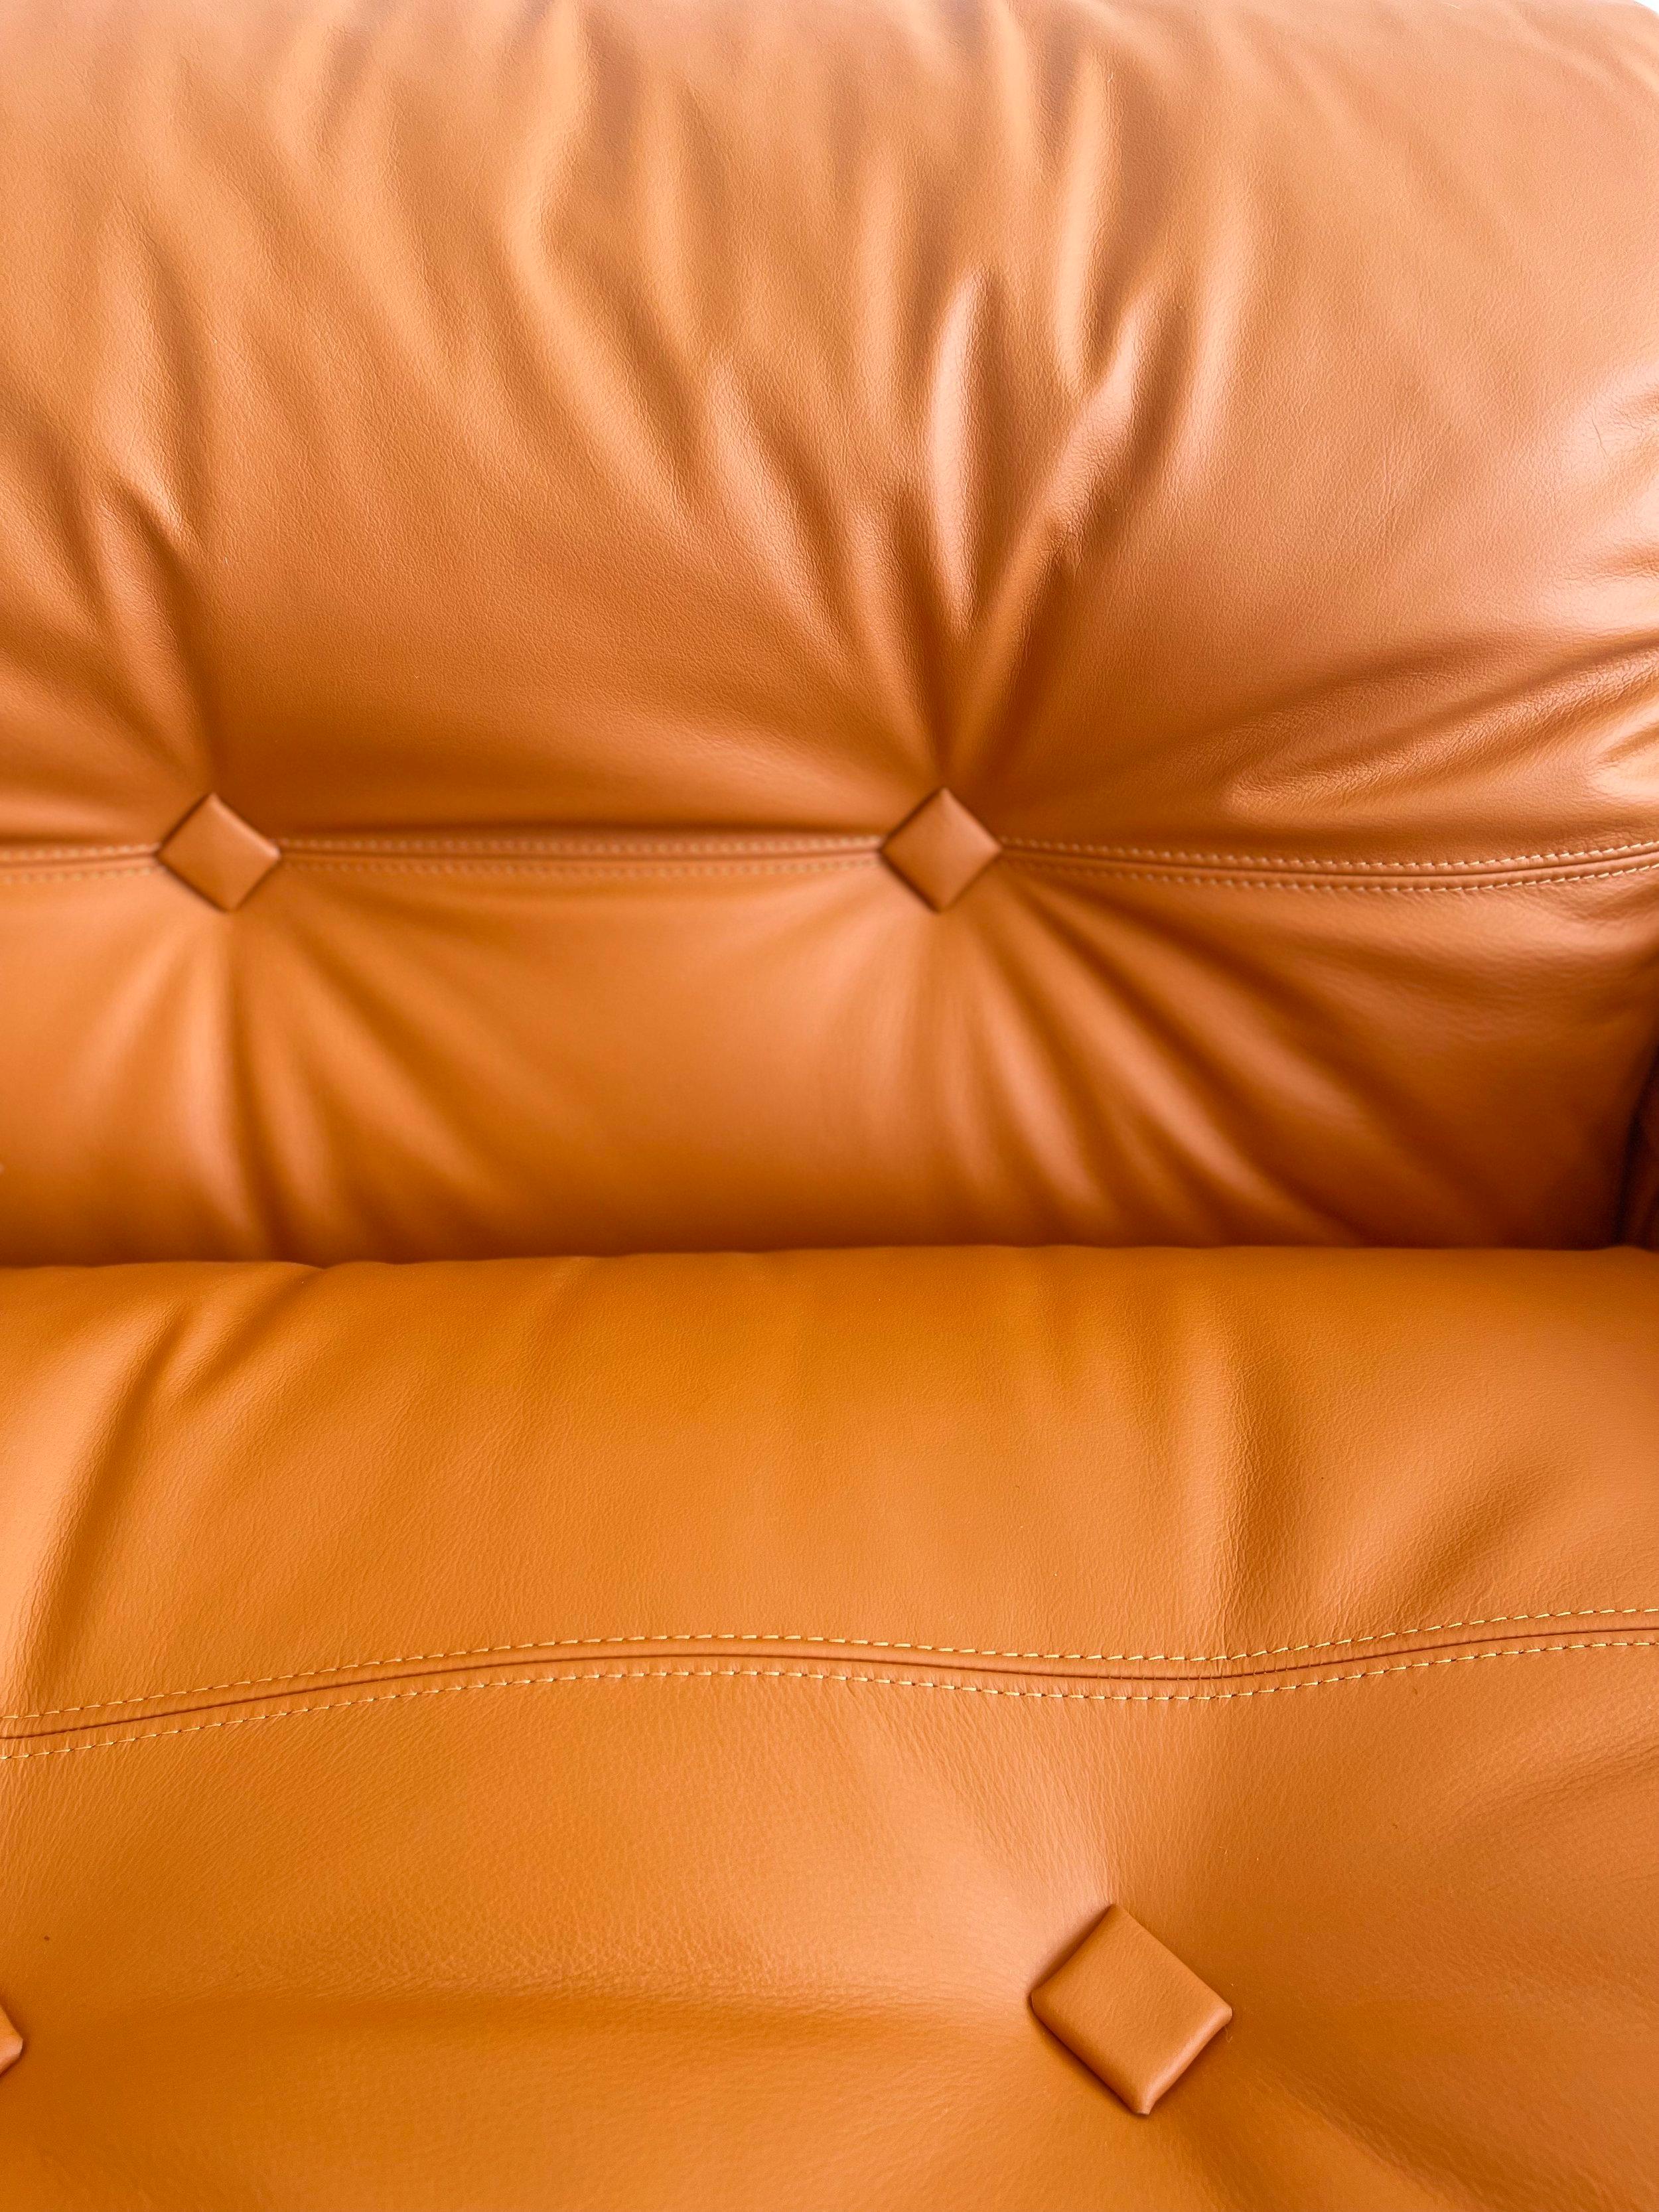 Adriano Piazzesi 1970s Sofa Newly Upholstered with Copper Brown Italian Leather For Sale 9